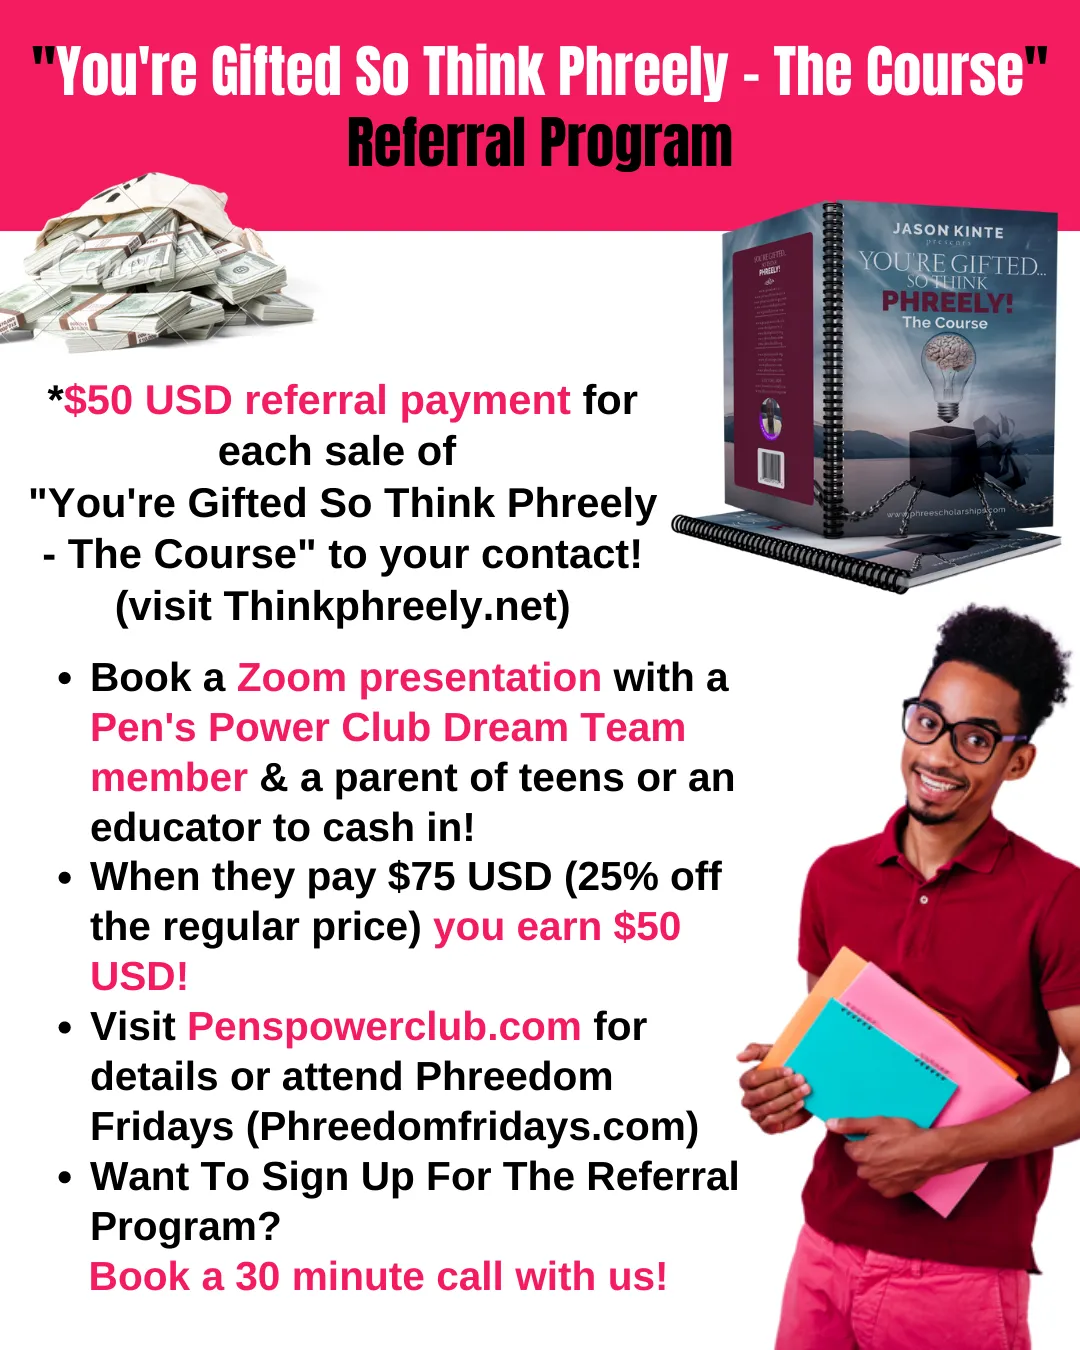 “You’re Gifted So Think Phreely-The Course-Referral Program